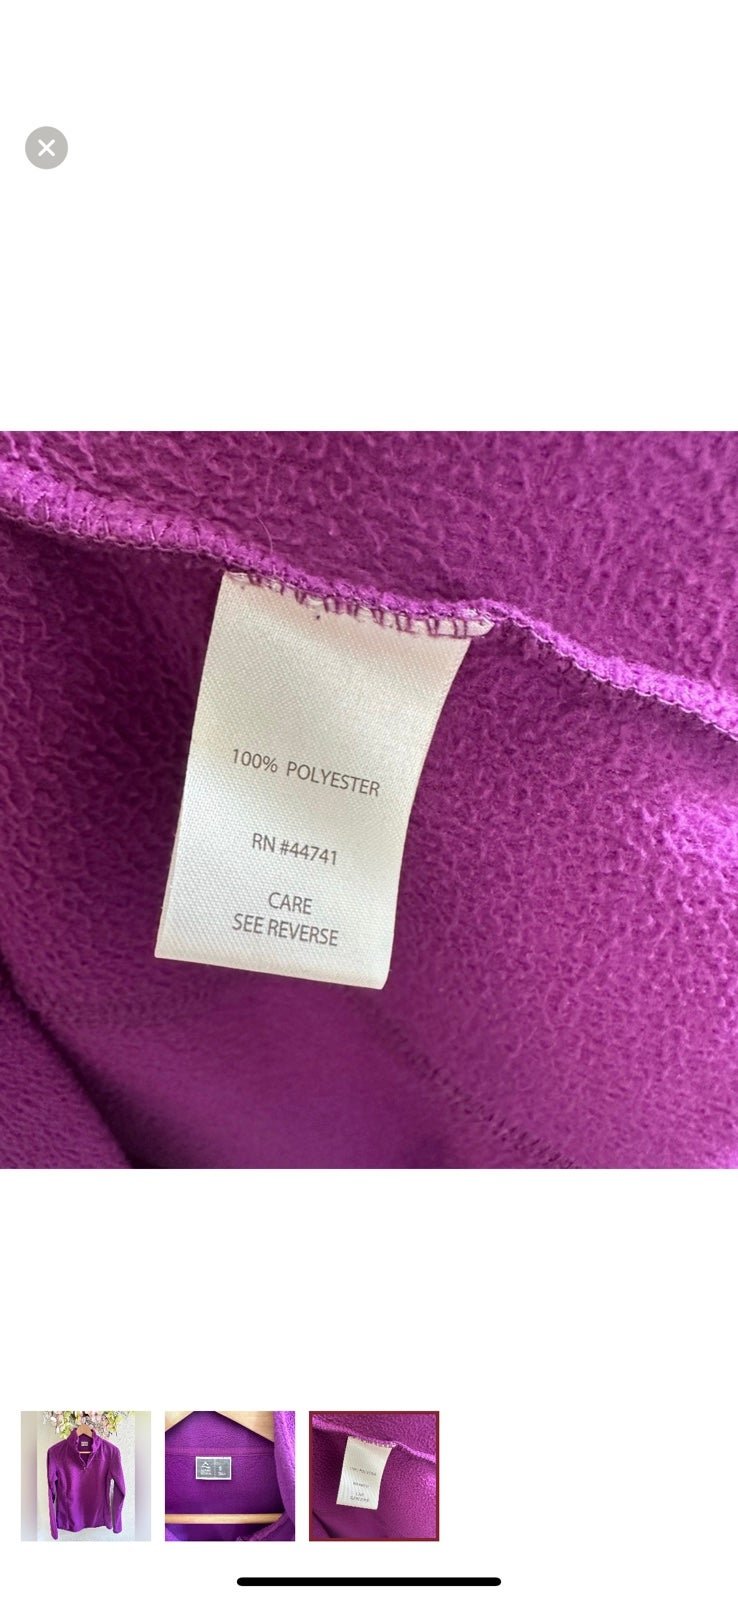 Latest  Woman’s purple 3 quarter fleece zip up sweater , size S O9rCRsZH8 just for you